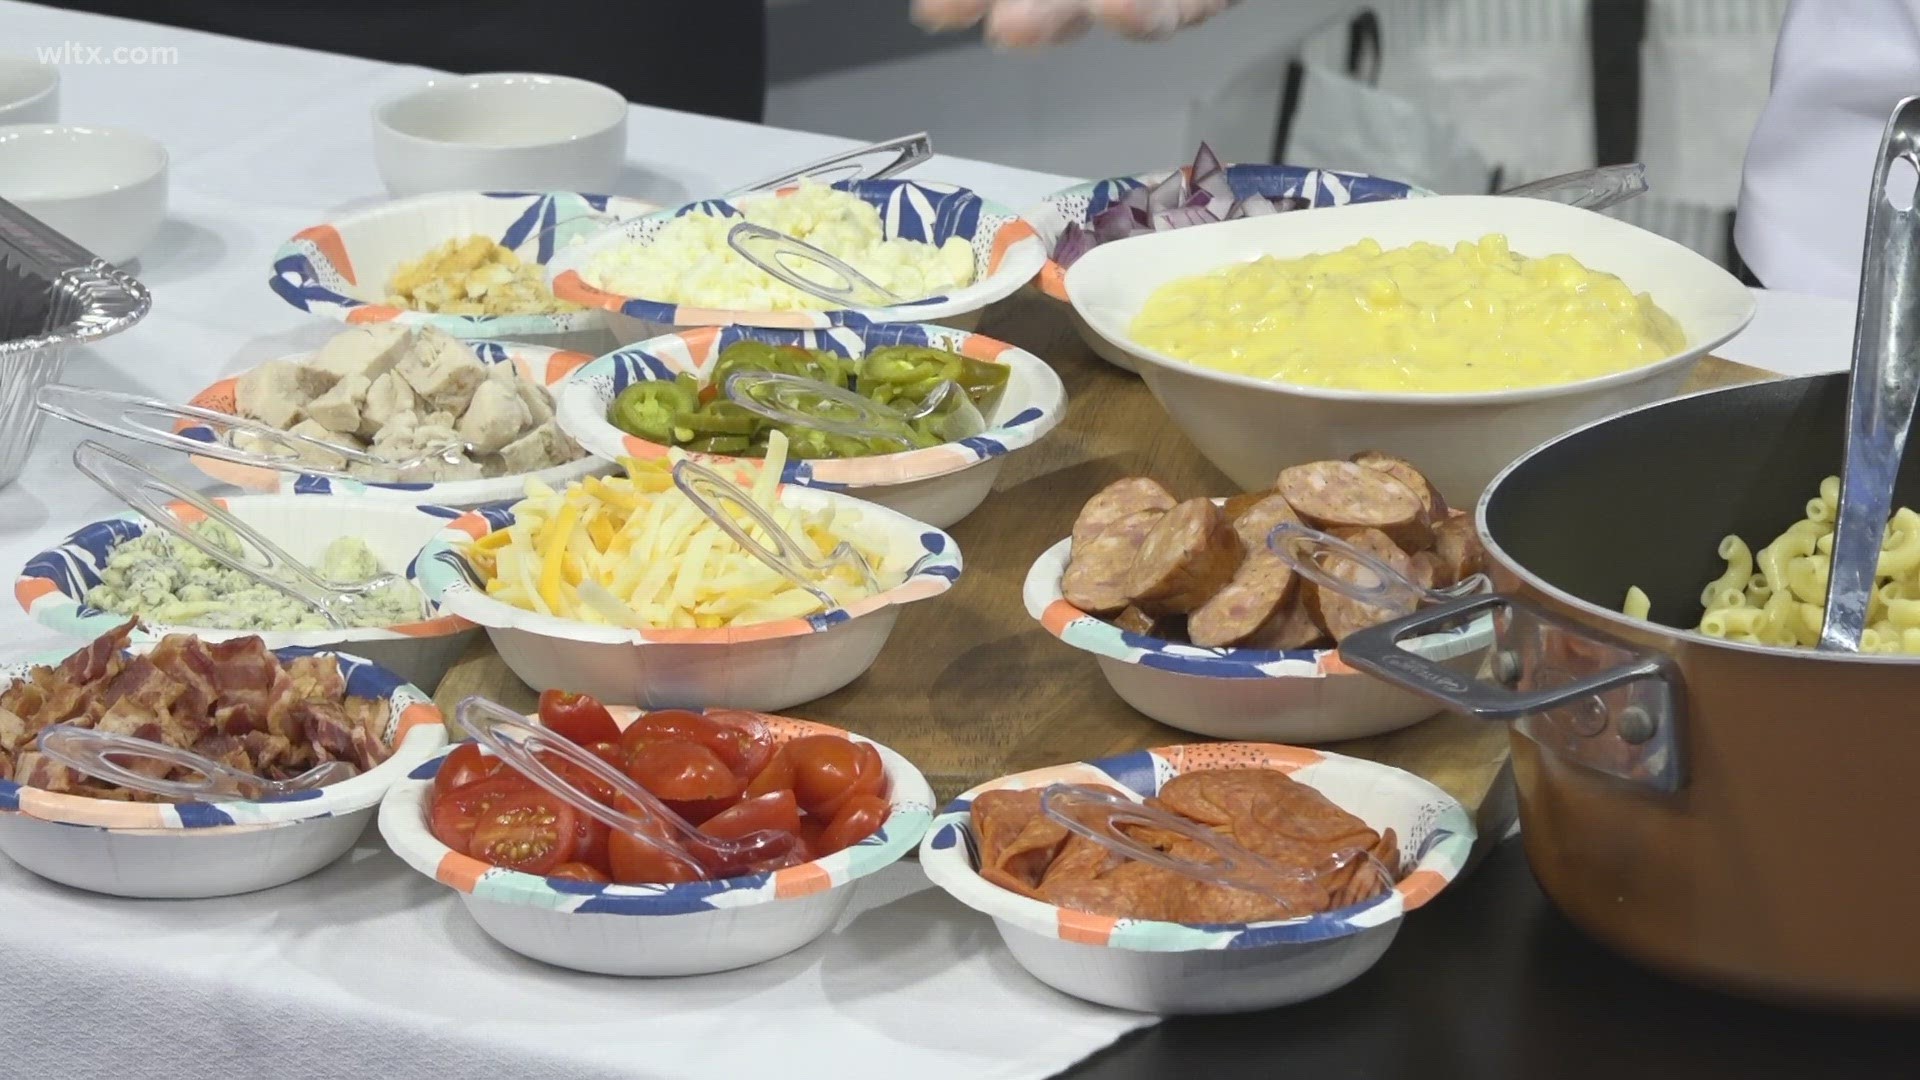 Chef Richard Conklin stopped by "News19 This Morning" to demonstrate some quick and easy food options for your next tailgate.